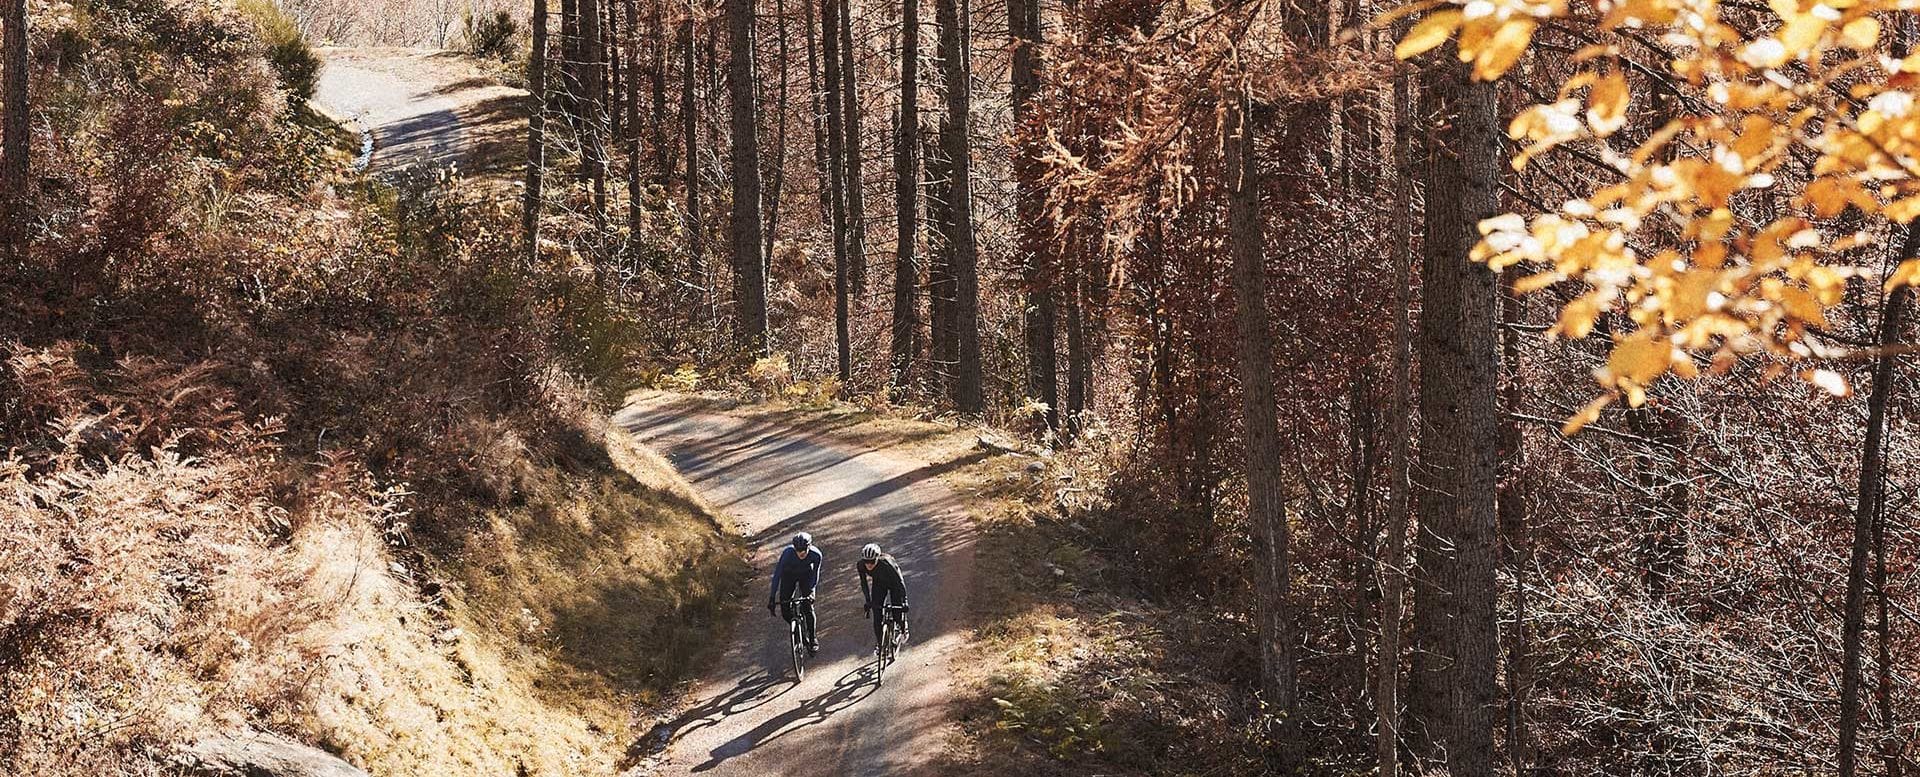 A season’s end in Val Bodengo. Cycling through the warm colours of late autumn.